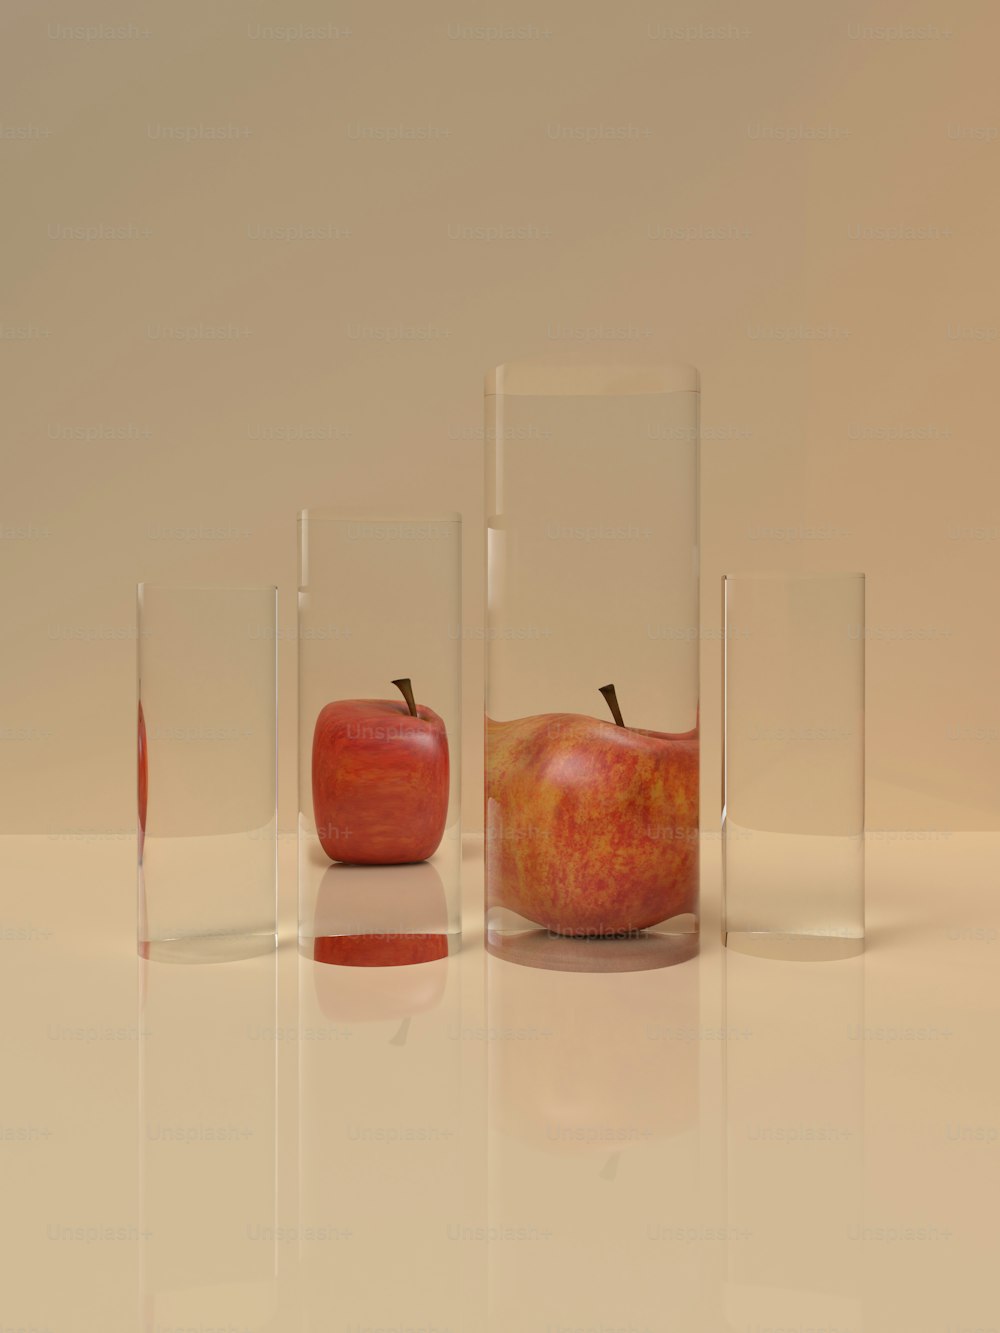 a group of three glass vases with apples in them